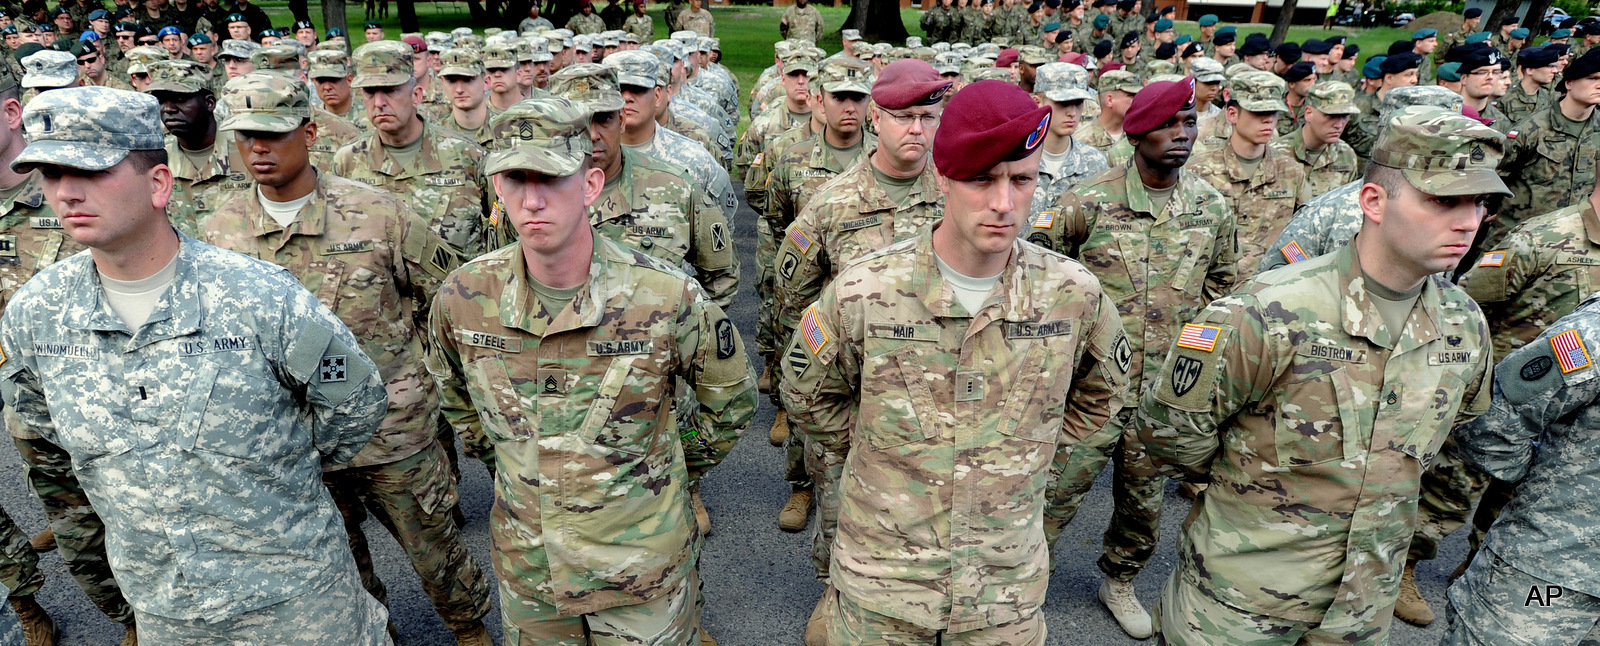 U.S. Army soldiers representing units participating in the the Anaconda-16 military exercise, attend the opening ceremony, in Warsaw, Poland, Monday, June 6, 2016. Poland and some NATO members launched their biggest ever exercise, involving some 31,000 troops in a show of force to neighboring Russia.